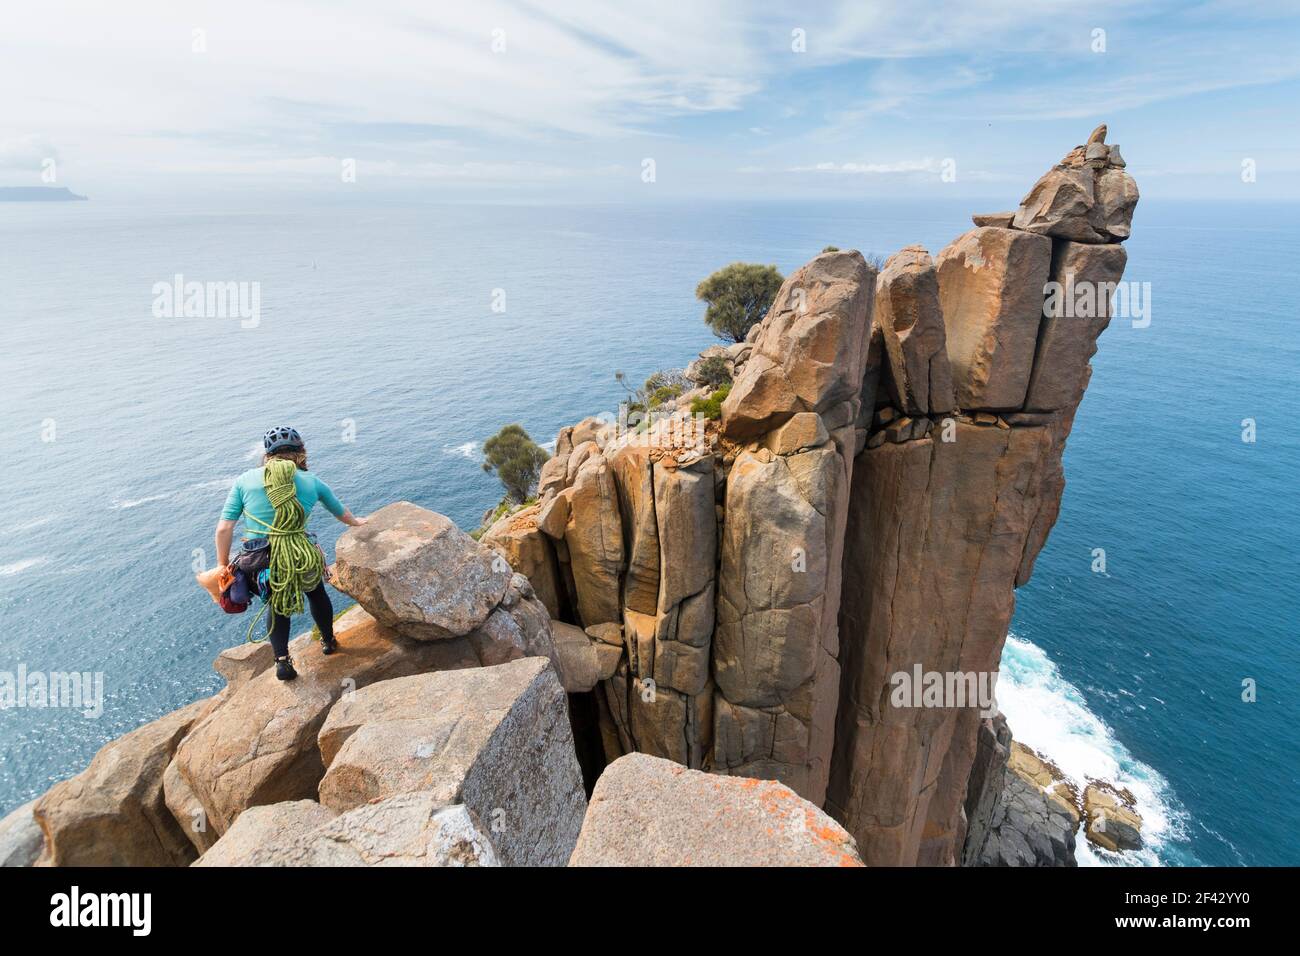 Female adventurer heads off into the unkown, armed with ropes and climbing gear, as she explores dolerite rock columns in the  sea cliffs of Cape Raoul, in Tasmania, Australia. Stock Photo